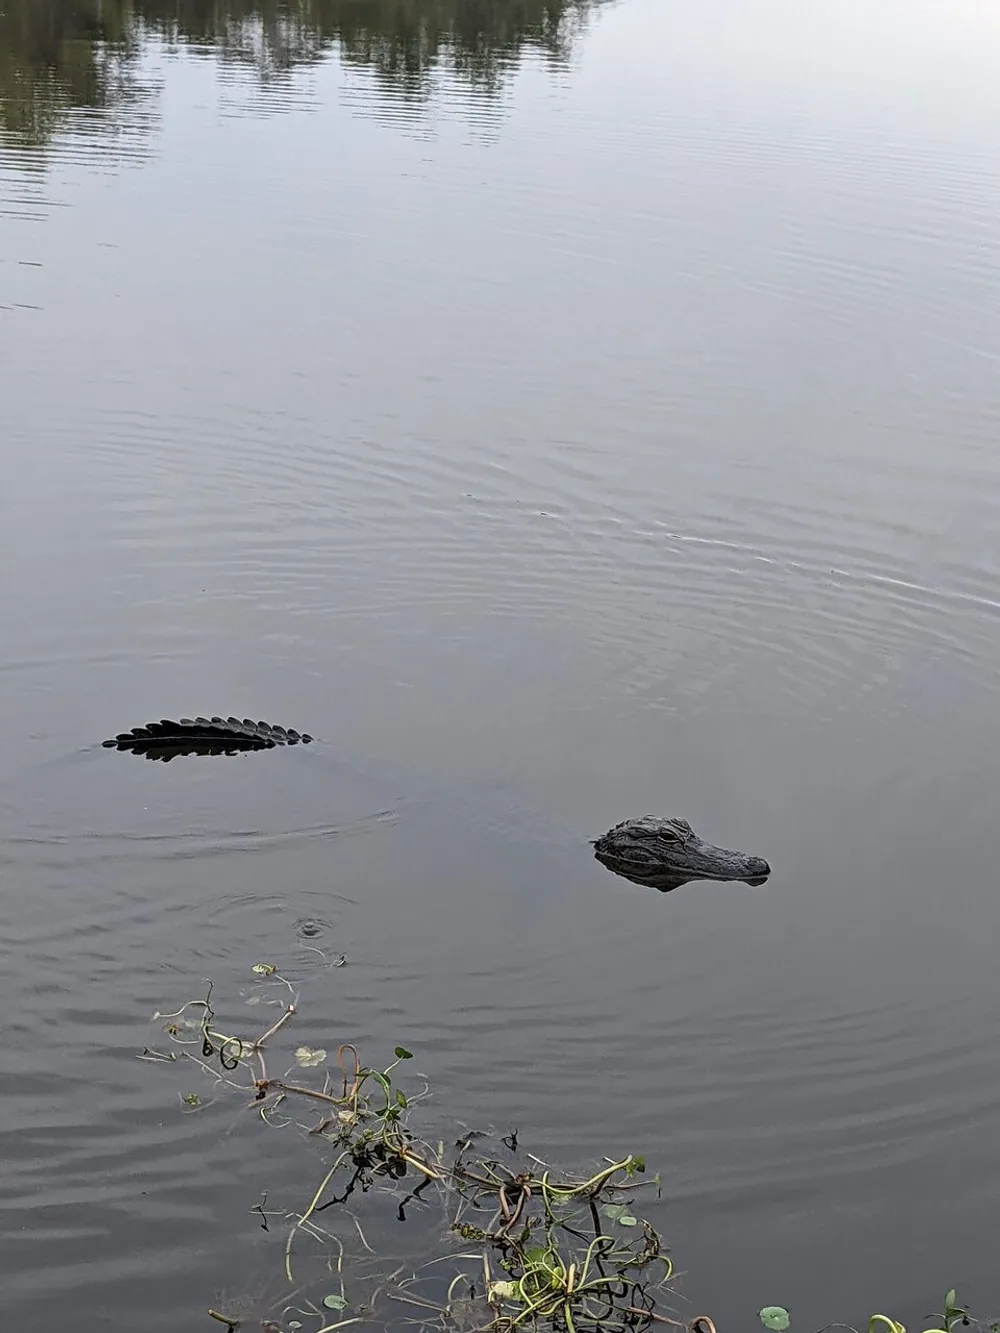 An alligator is partially submerged in water with only its head and a portion of its back visible above the surface